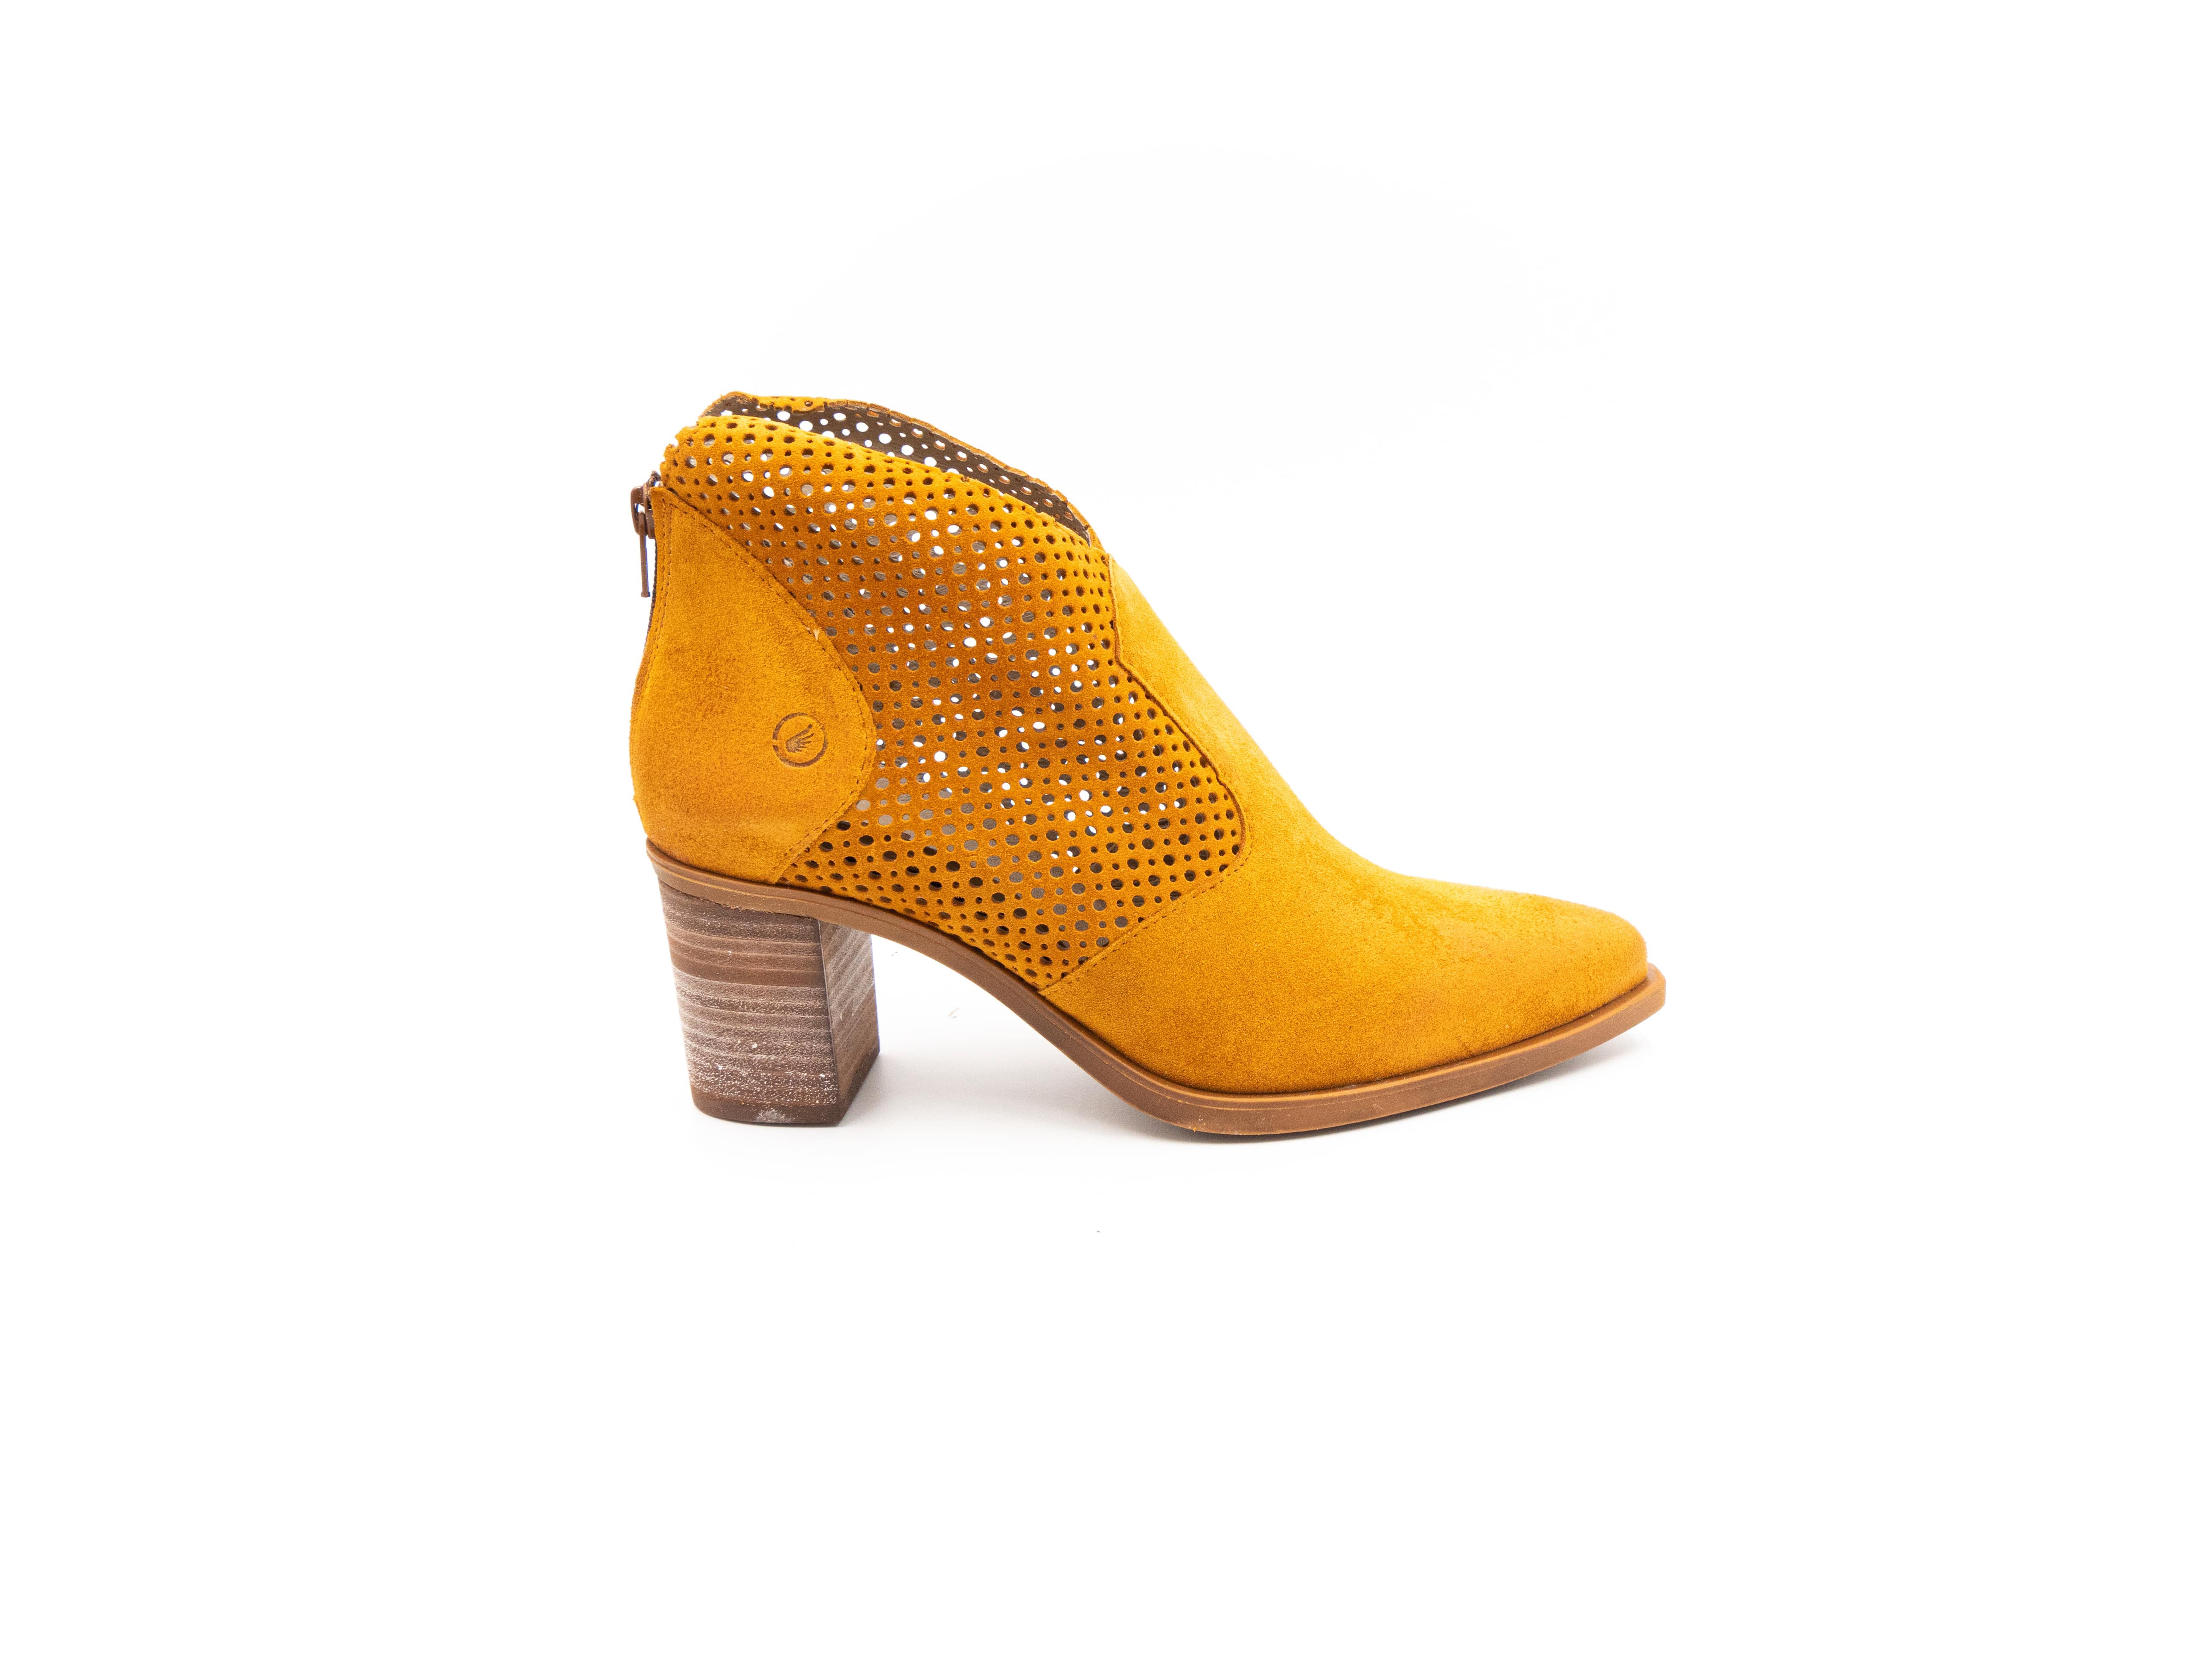 Summer boots in yellow.